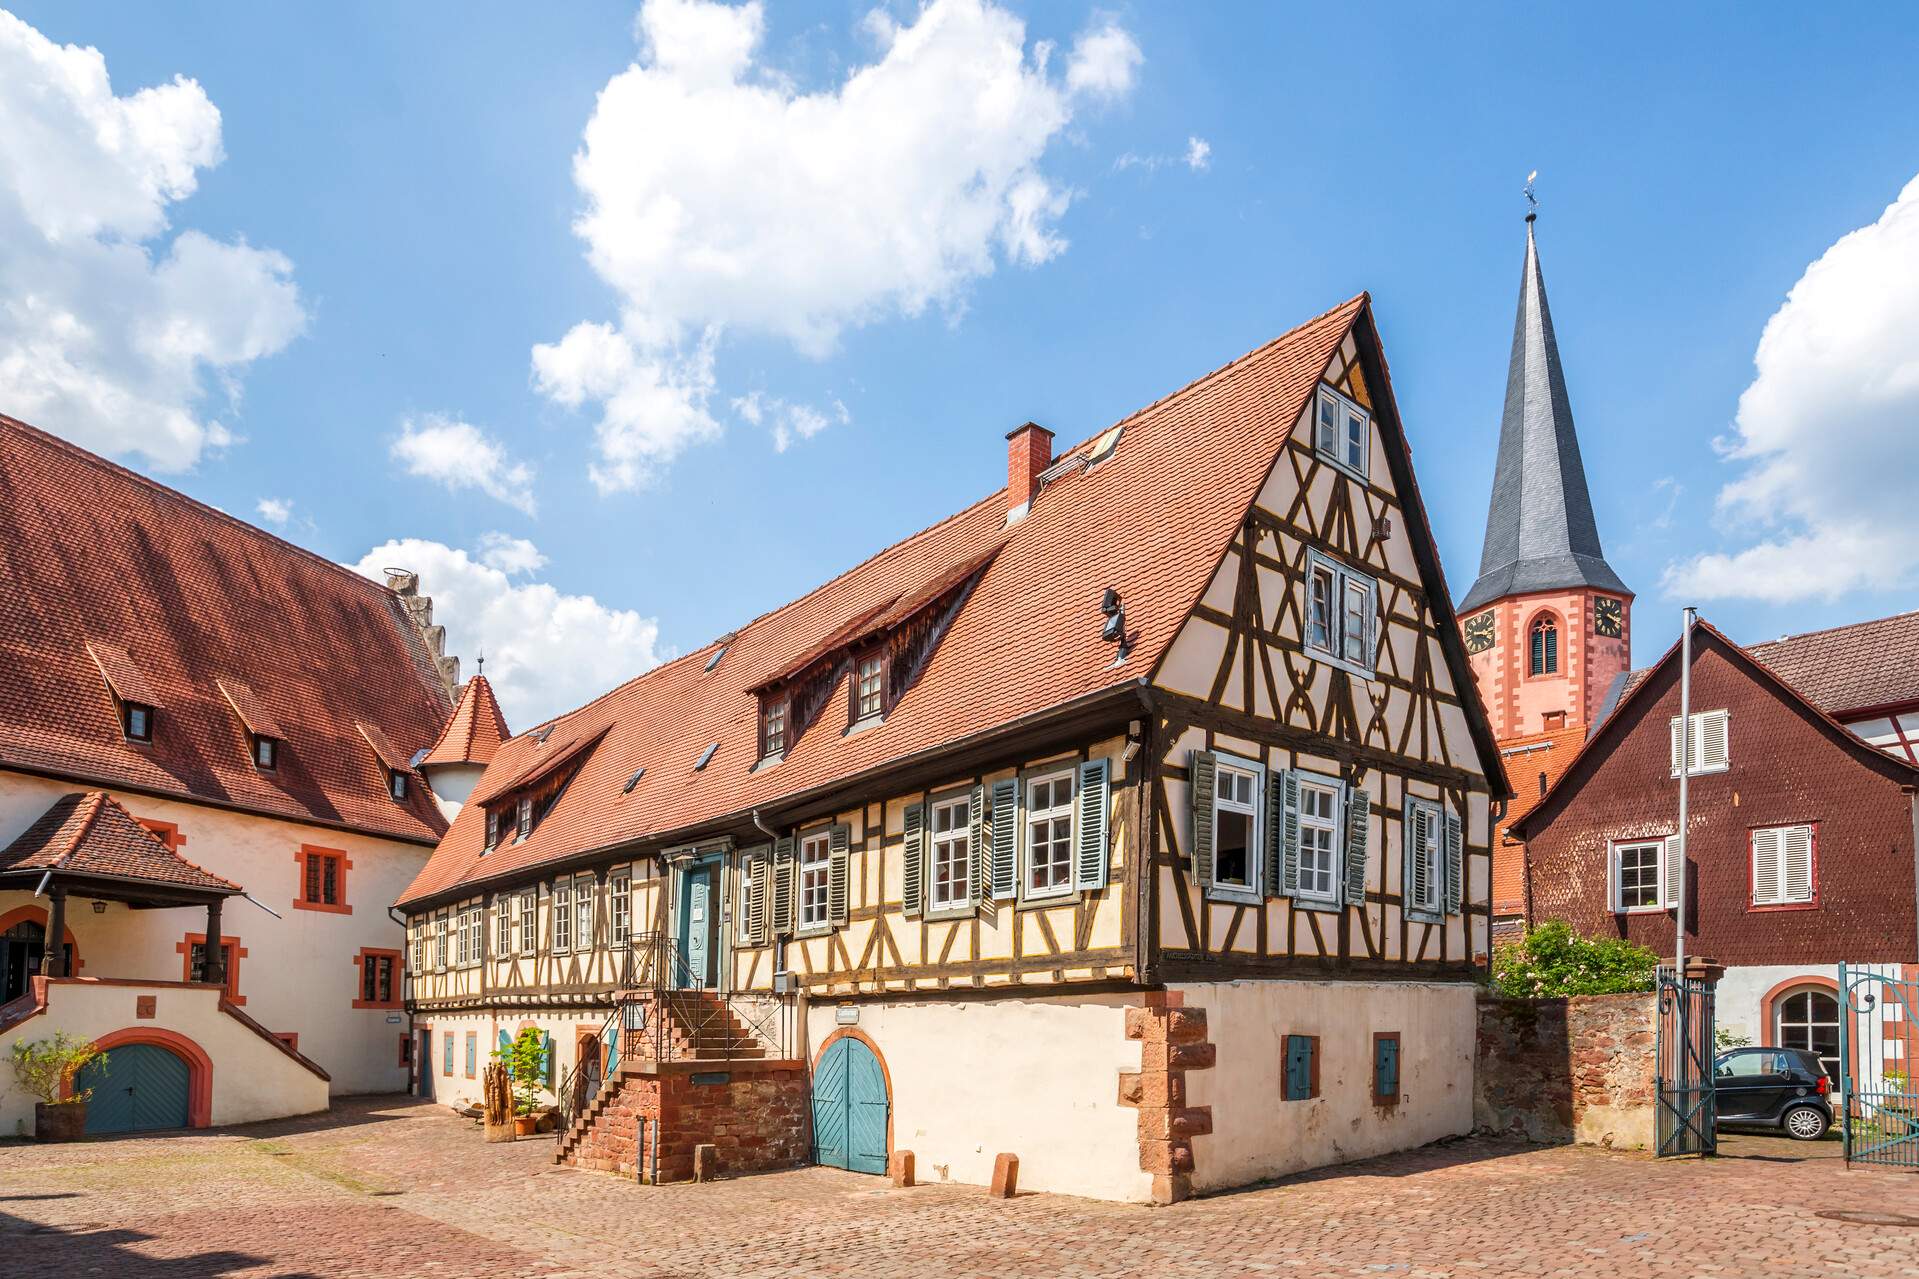 A large half-timbered home on a brick-paved street, backed by a tower with a tall, pointed roof.